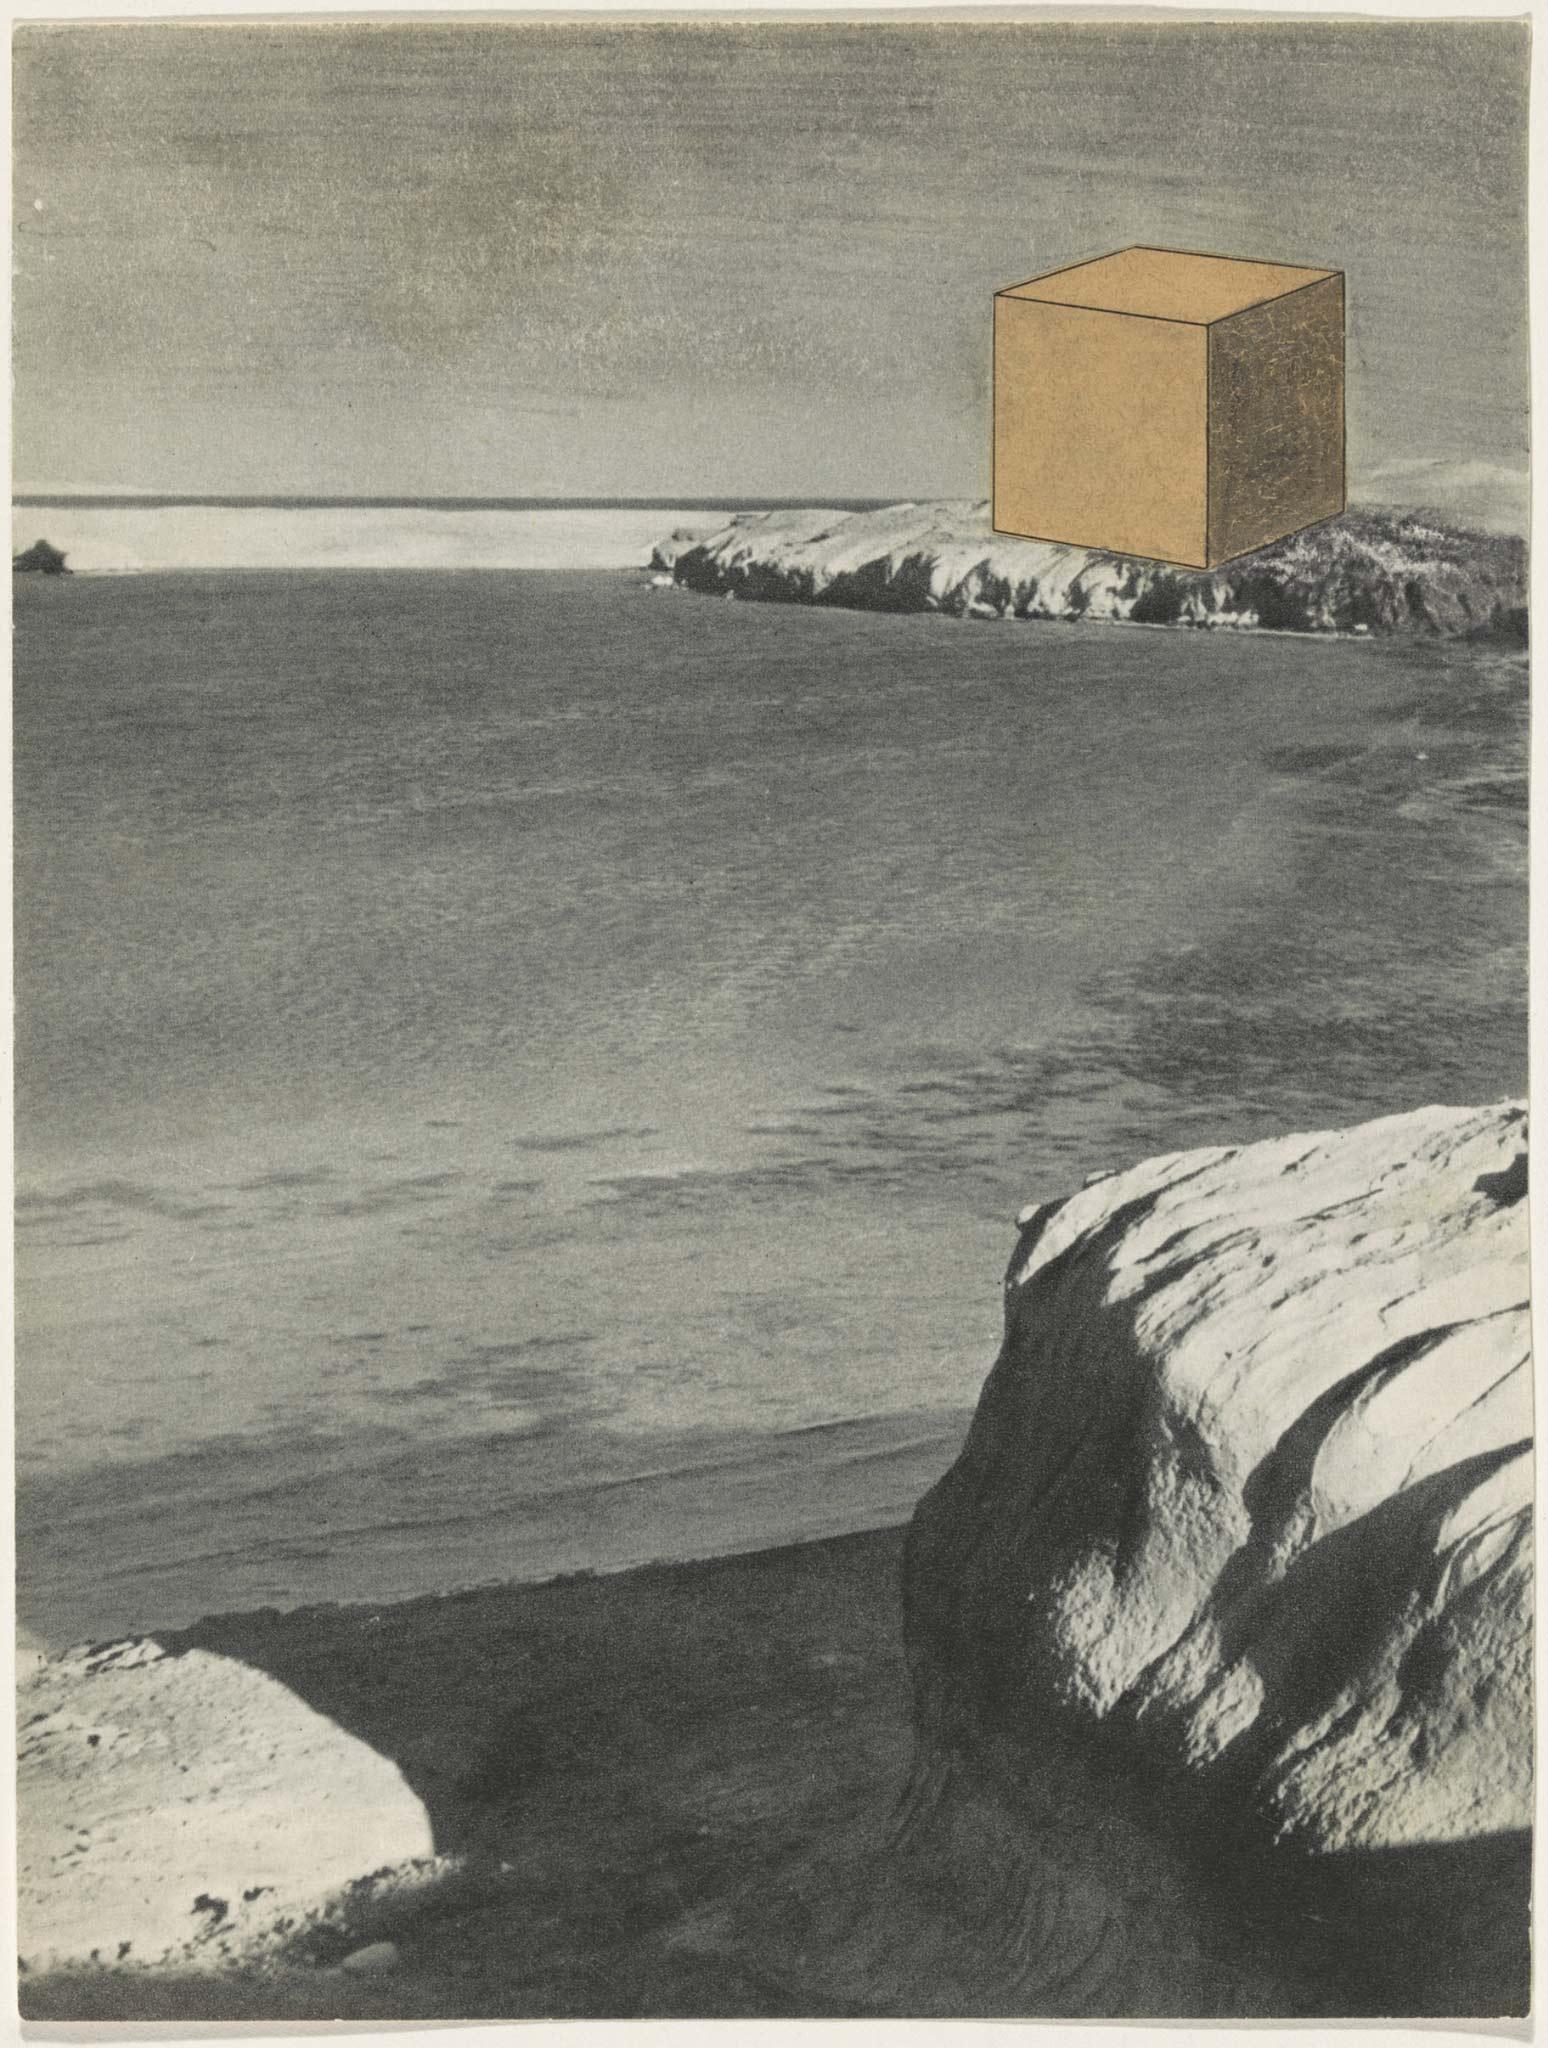 Robert Smithson, Proposal for a Monument on the Red Sea (1966)